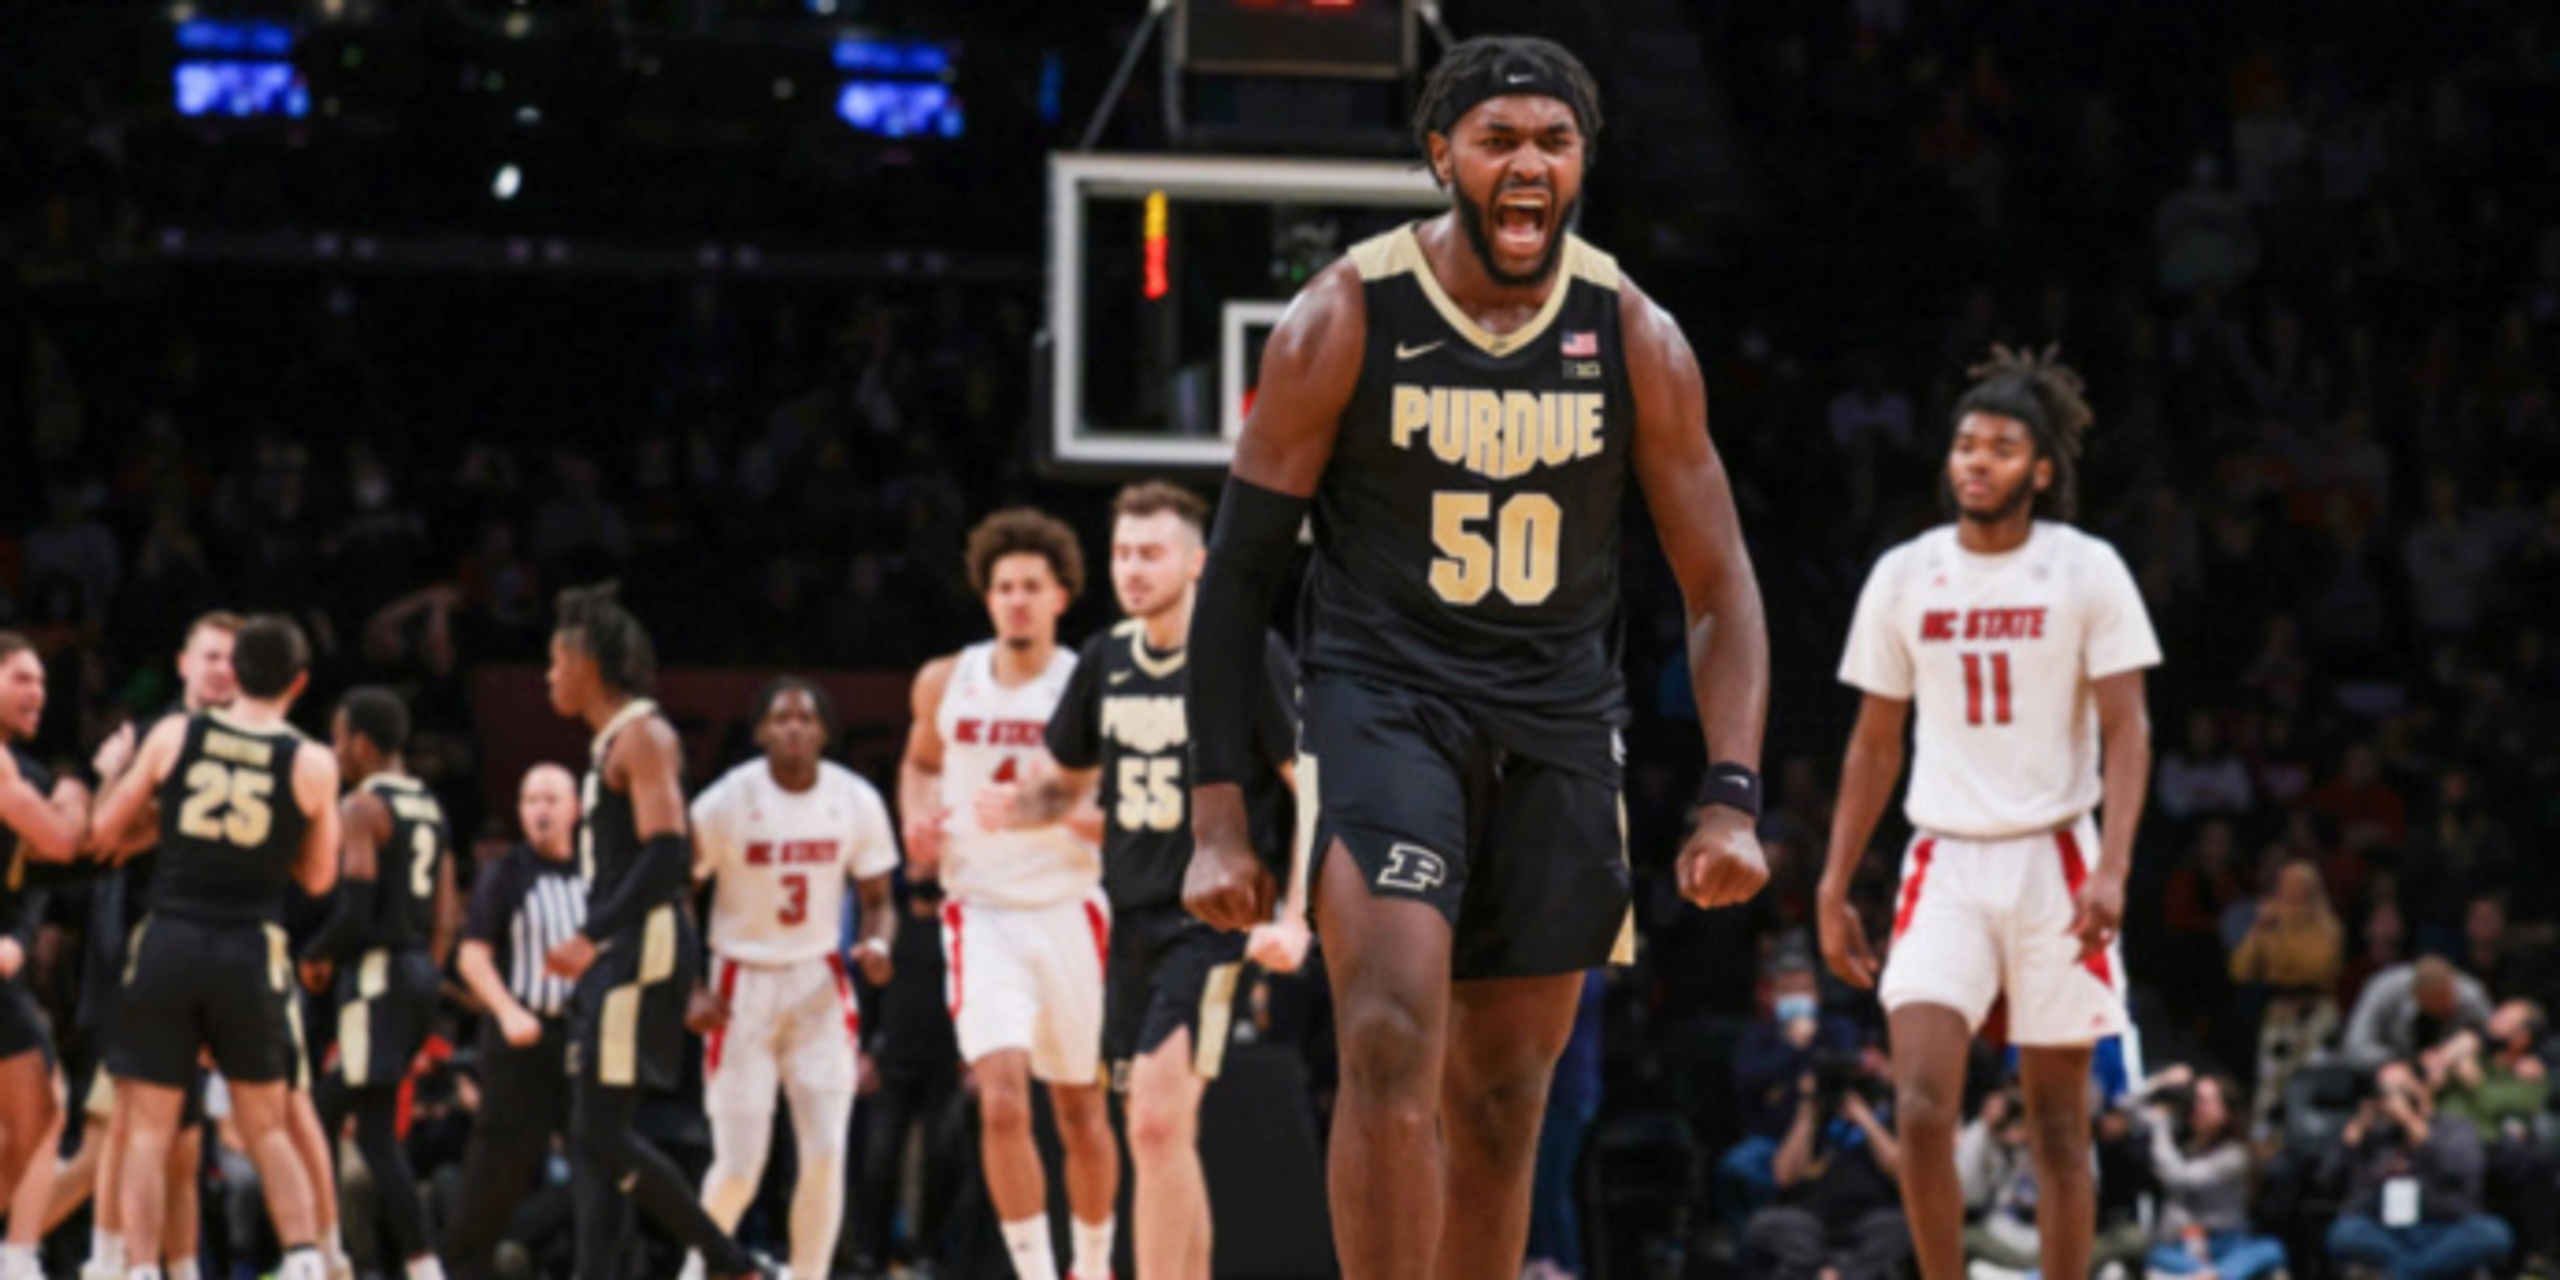 Williams, No. 1 Purdue rallies past NC State 82-72 in OT